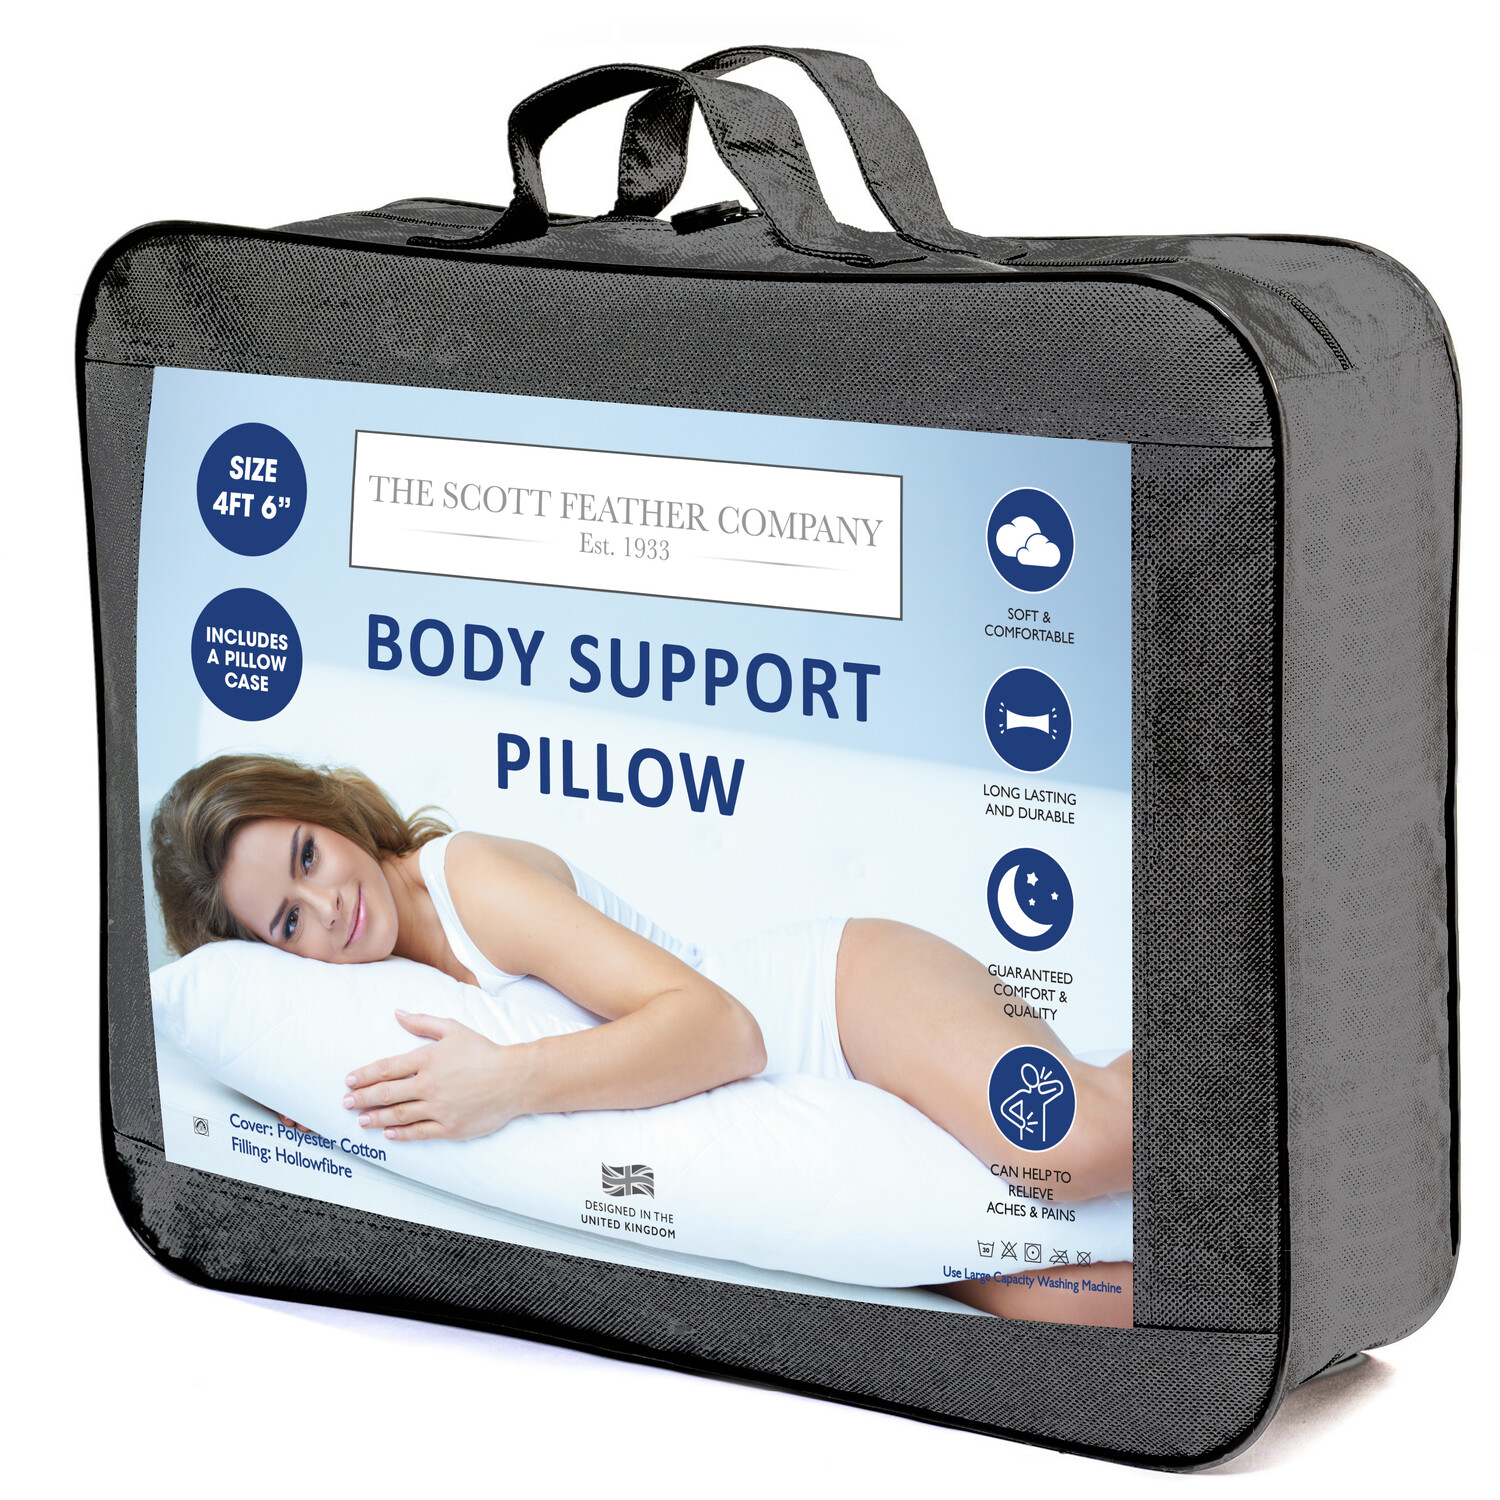 The Scott Feather Company White Body Support Pillow 137 x 15cm Image